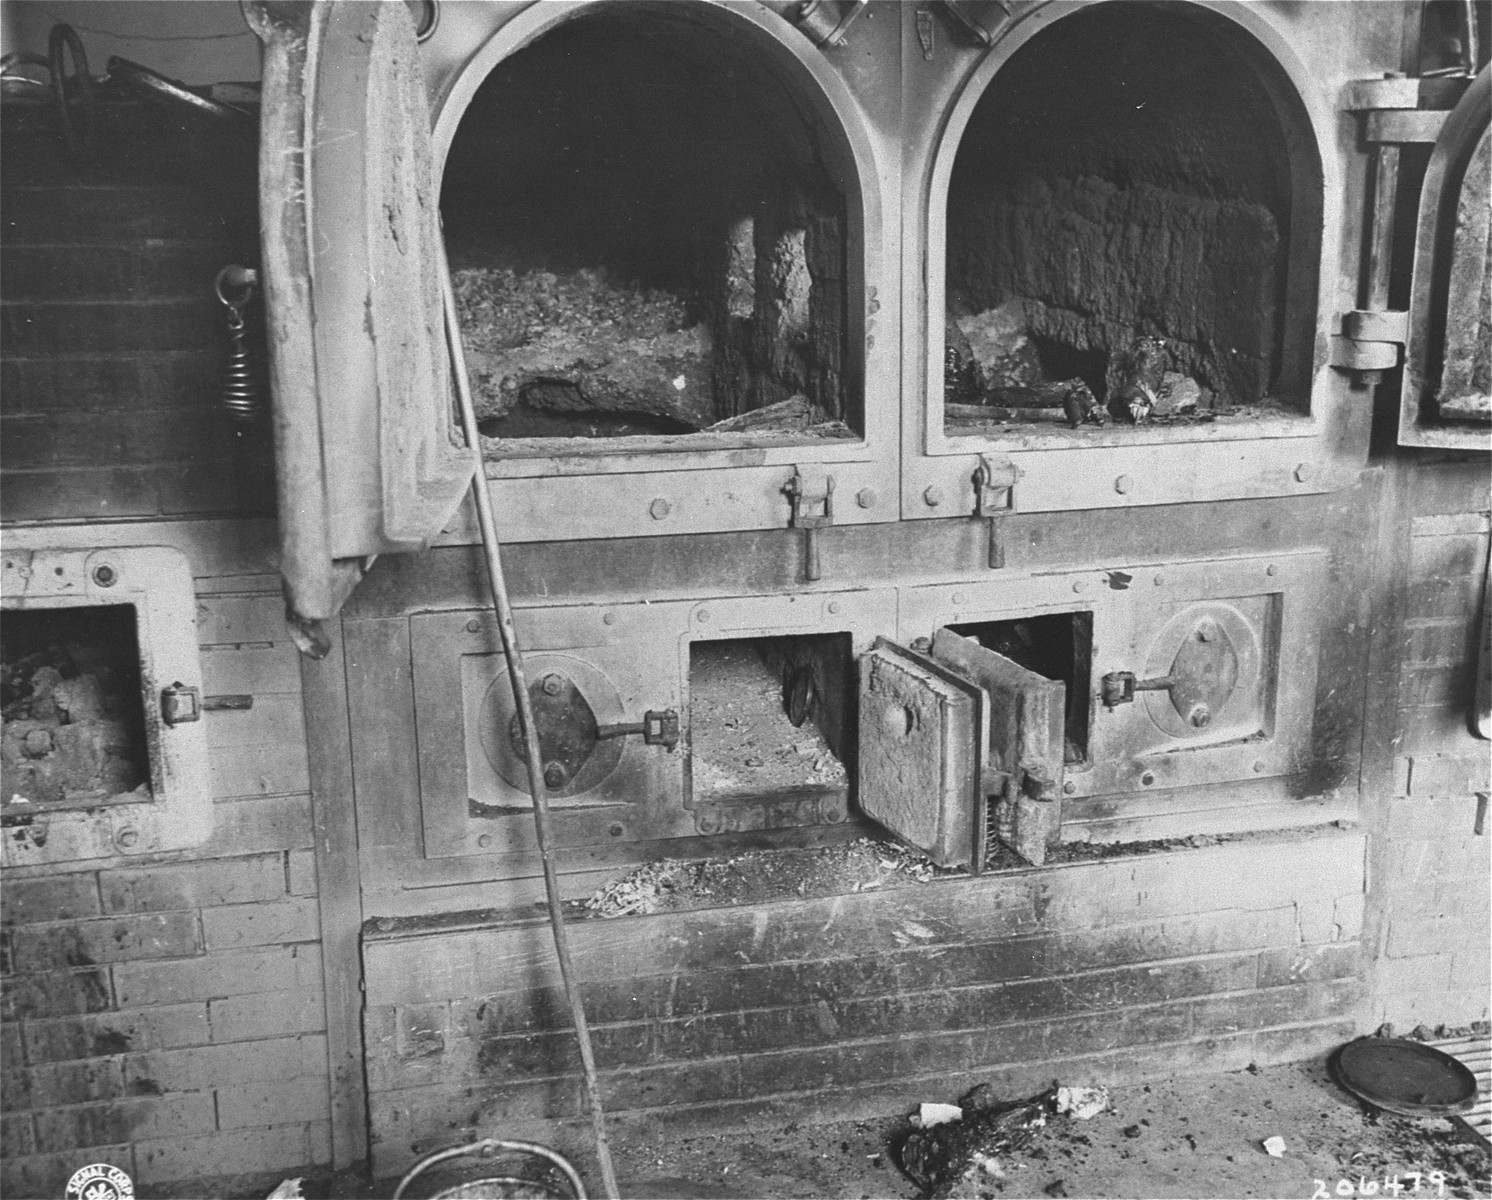 Crematorium furnaces in the Gusen concentration camp after the liberation.